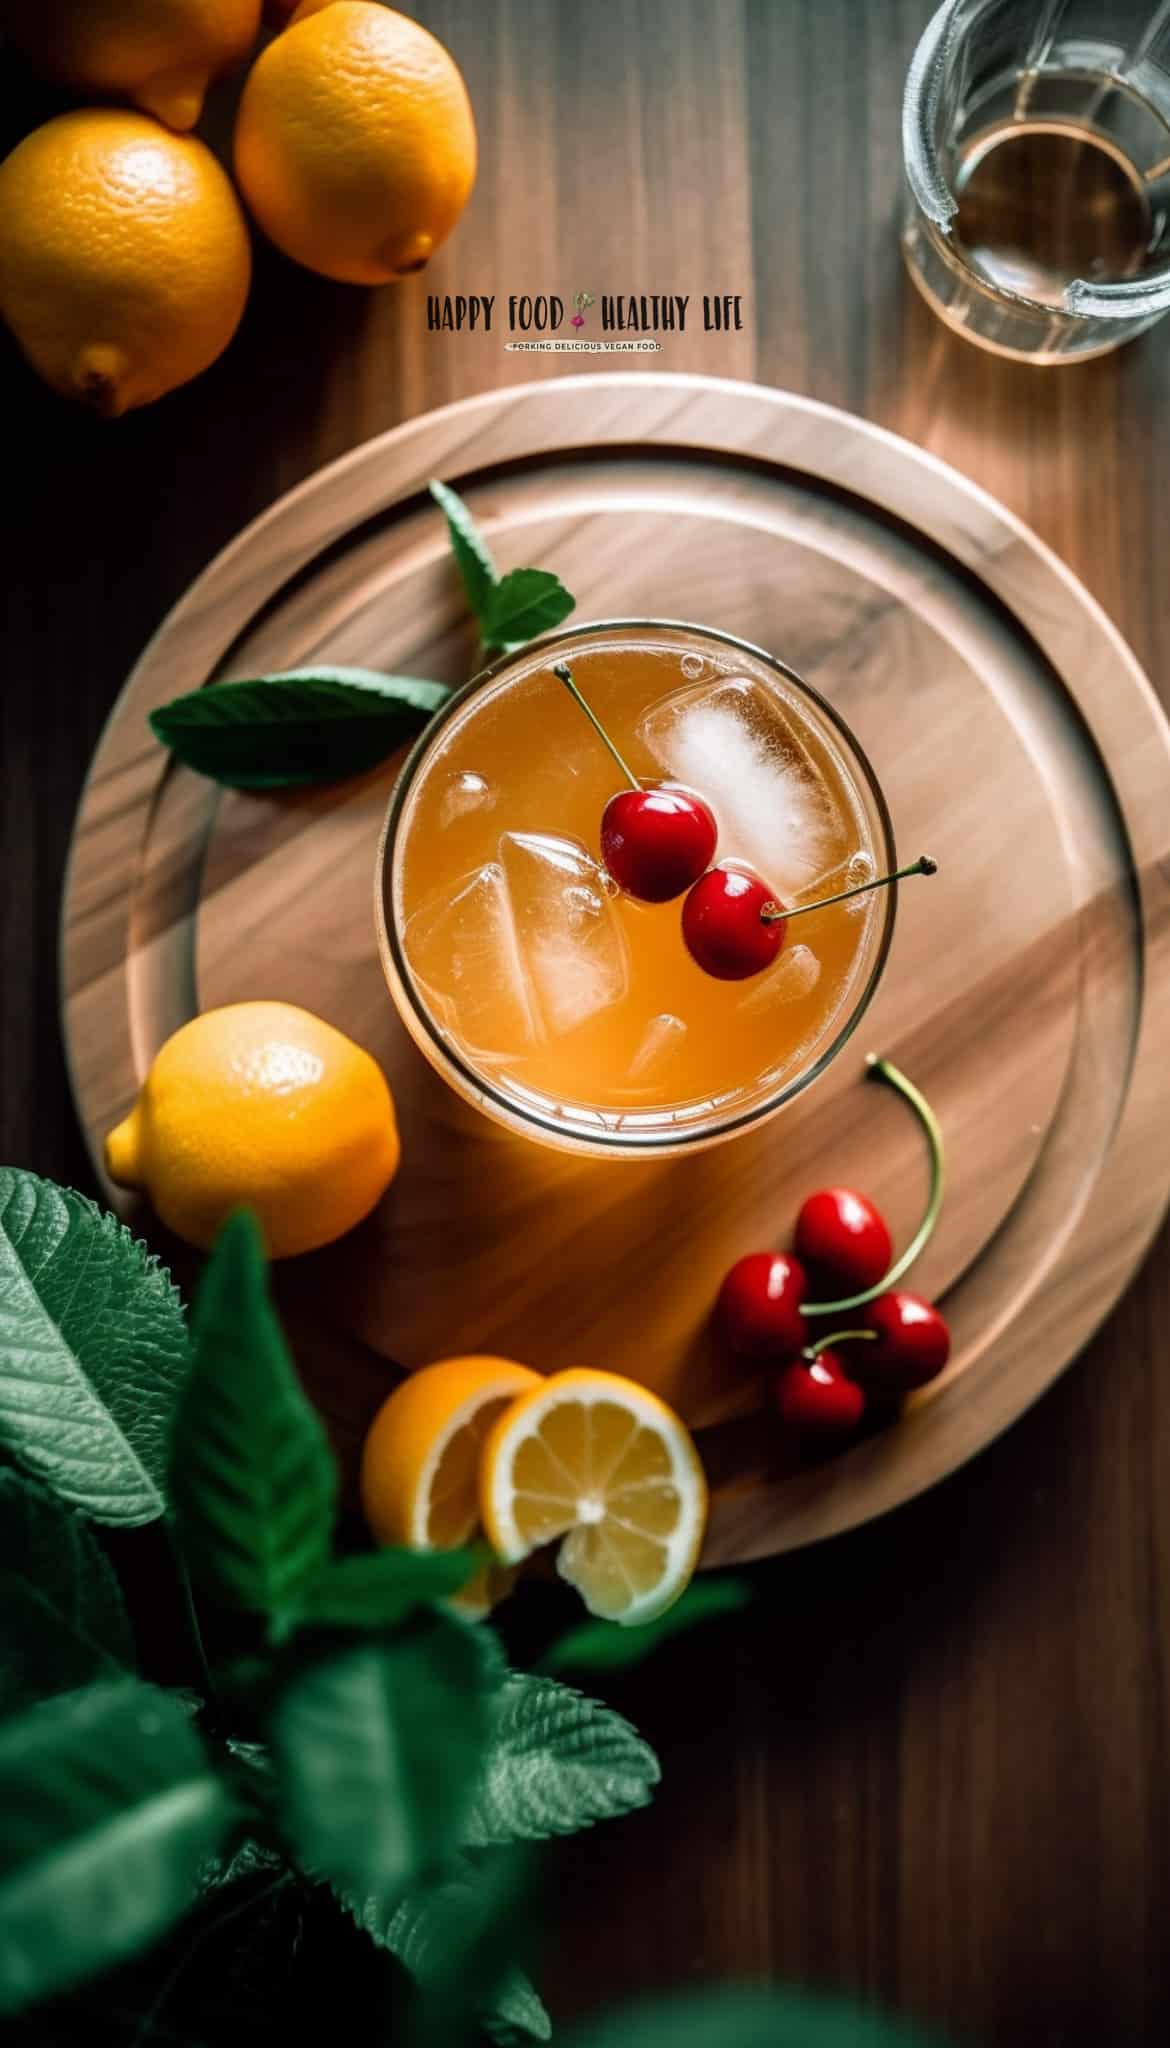 overhead top down view of a glass with yellow orange liquid in it on a wooden coaster, lemons and oranges sliced and cherries and fresh herbsw